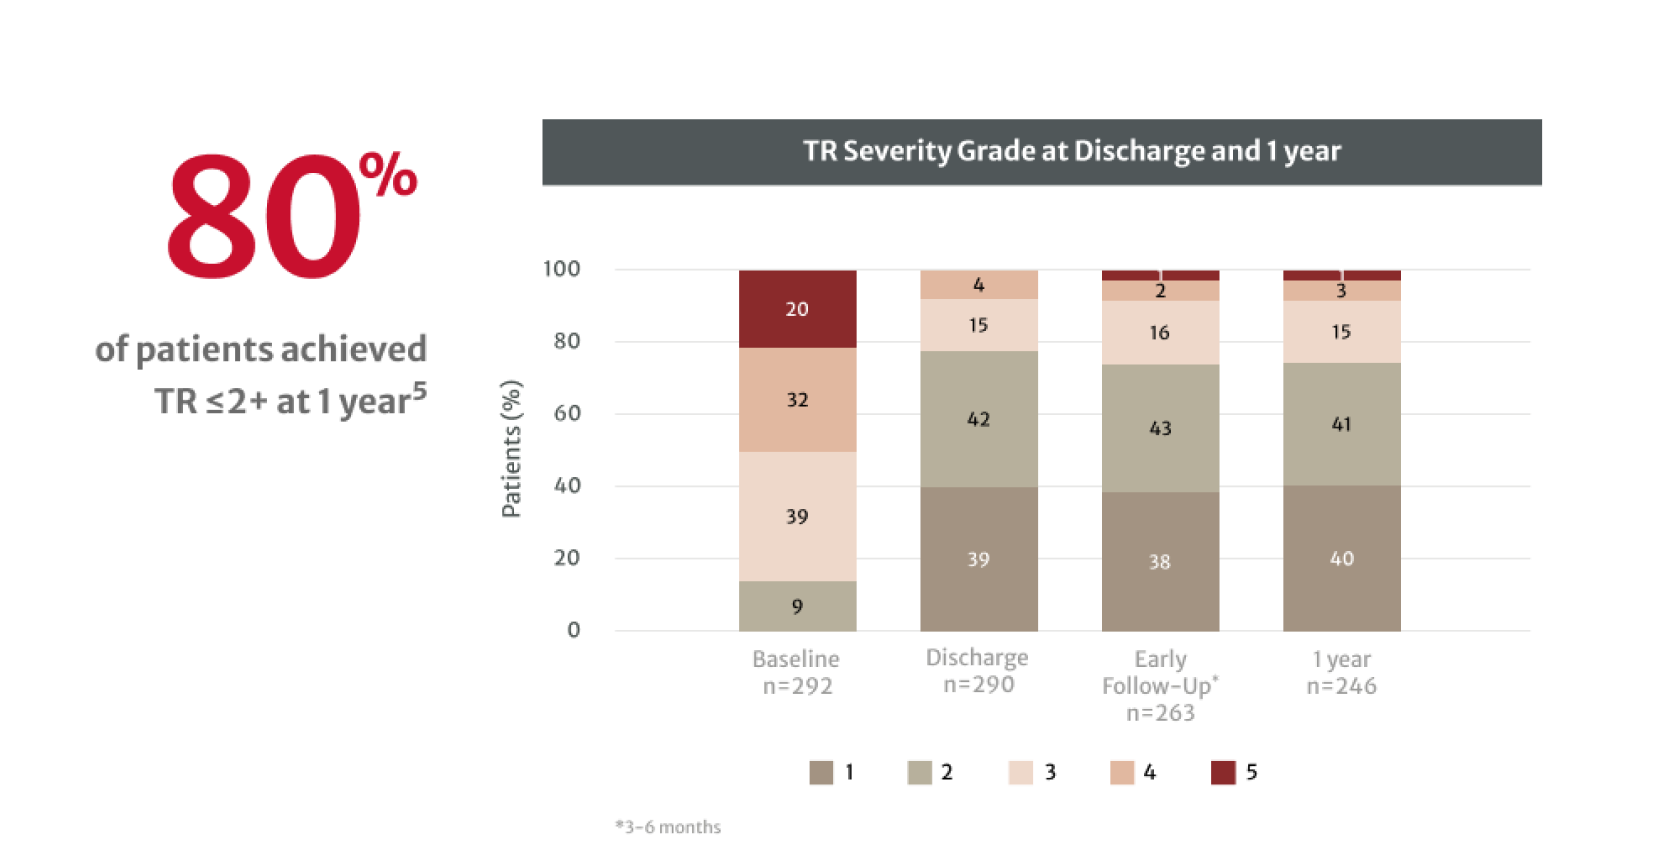 TR Severity Grade at Discharge and 1 year